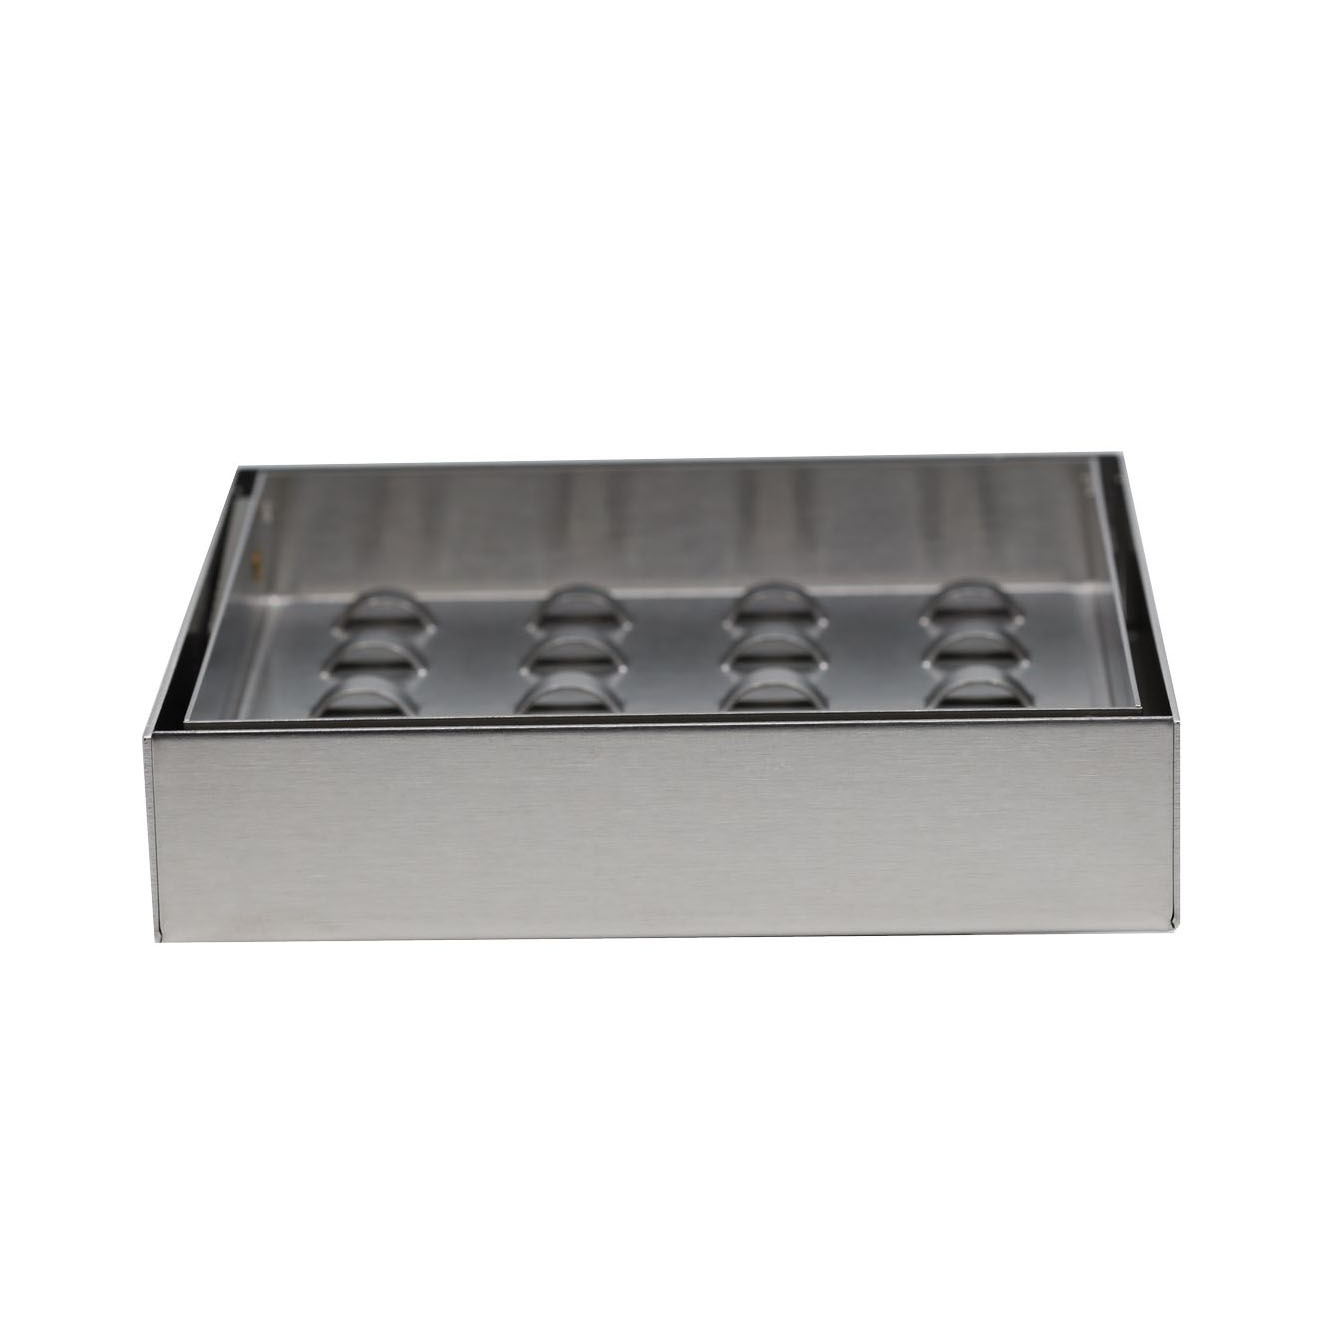 Buy Floor Drain - Stainless Steel - Recessed 6"X 6" Online | Construction Finishes | Qetaat.com